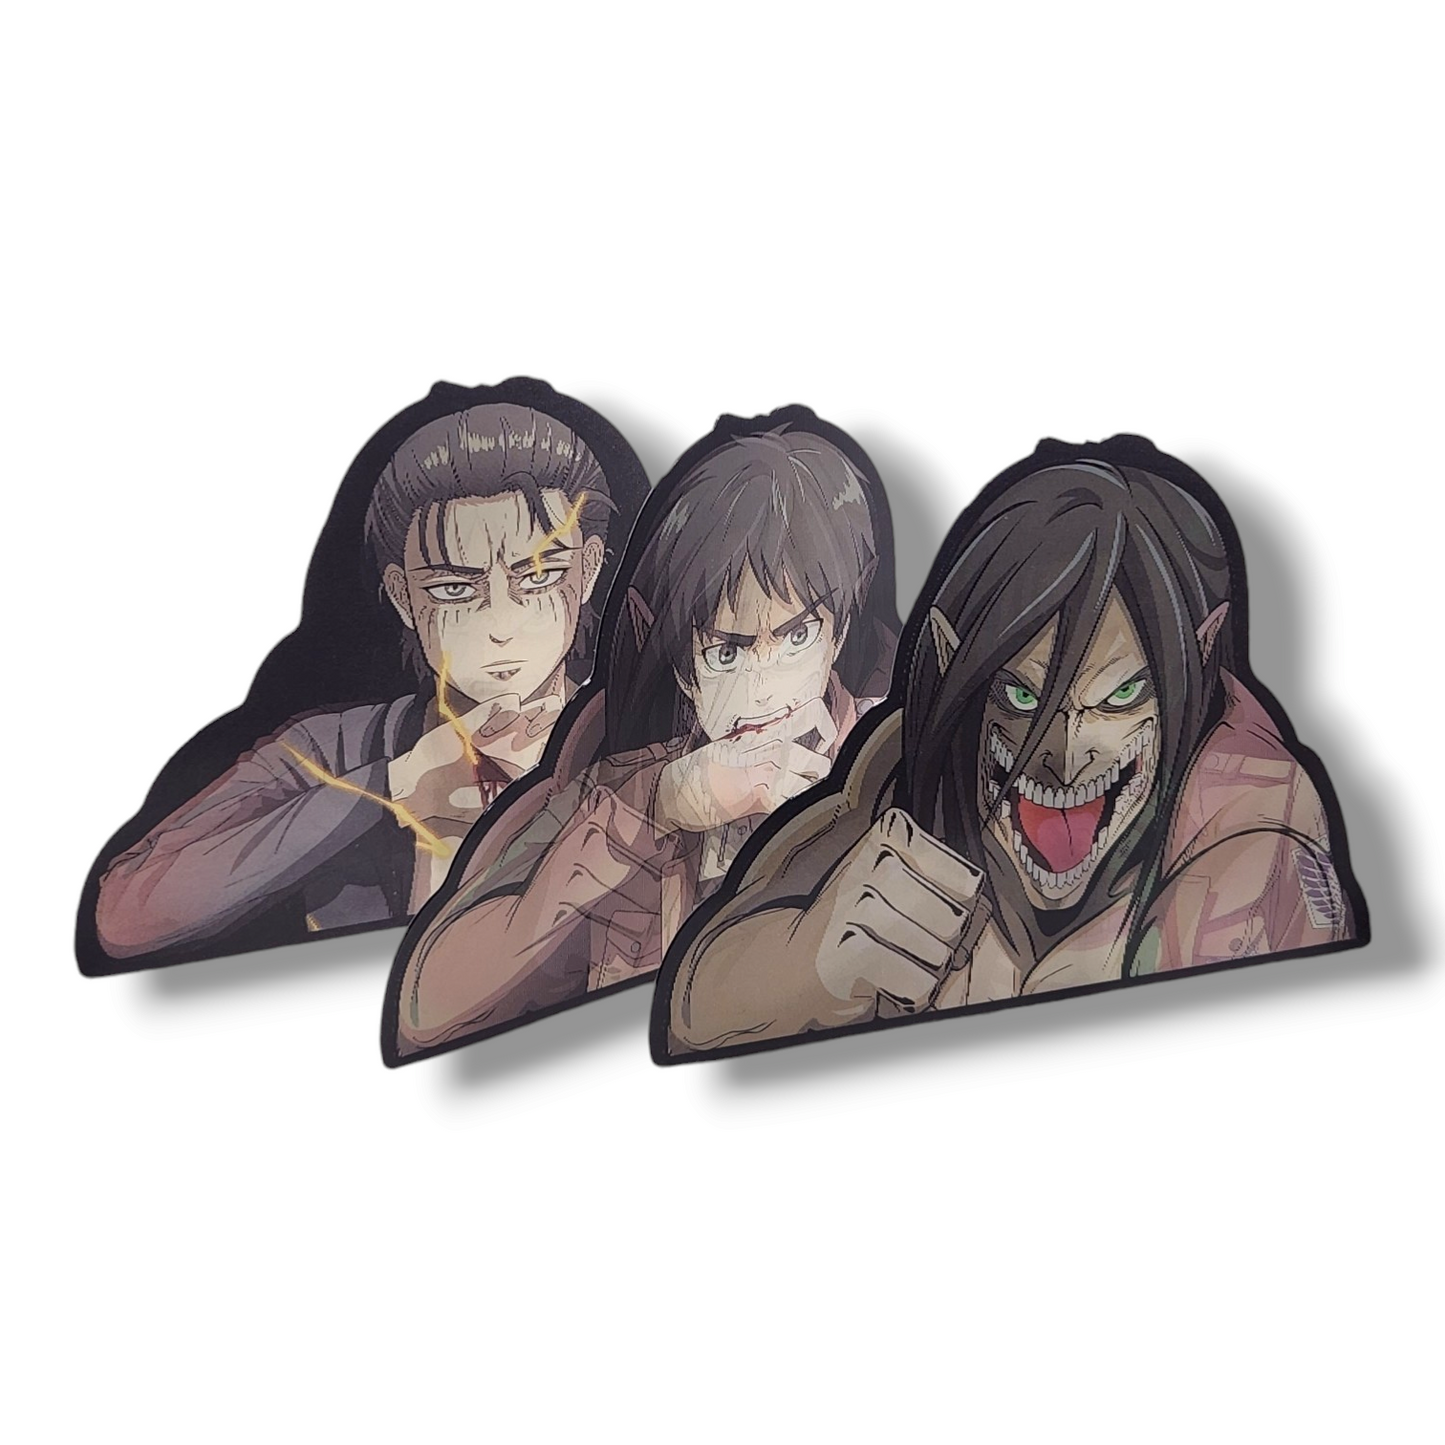 ATTACK ON TITANS 3D Motion Stickers